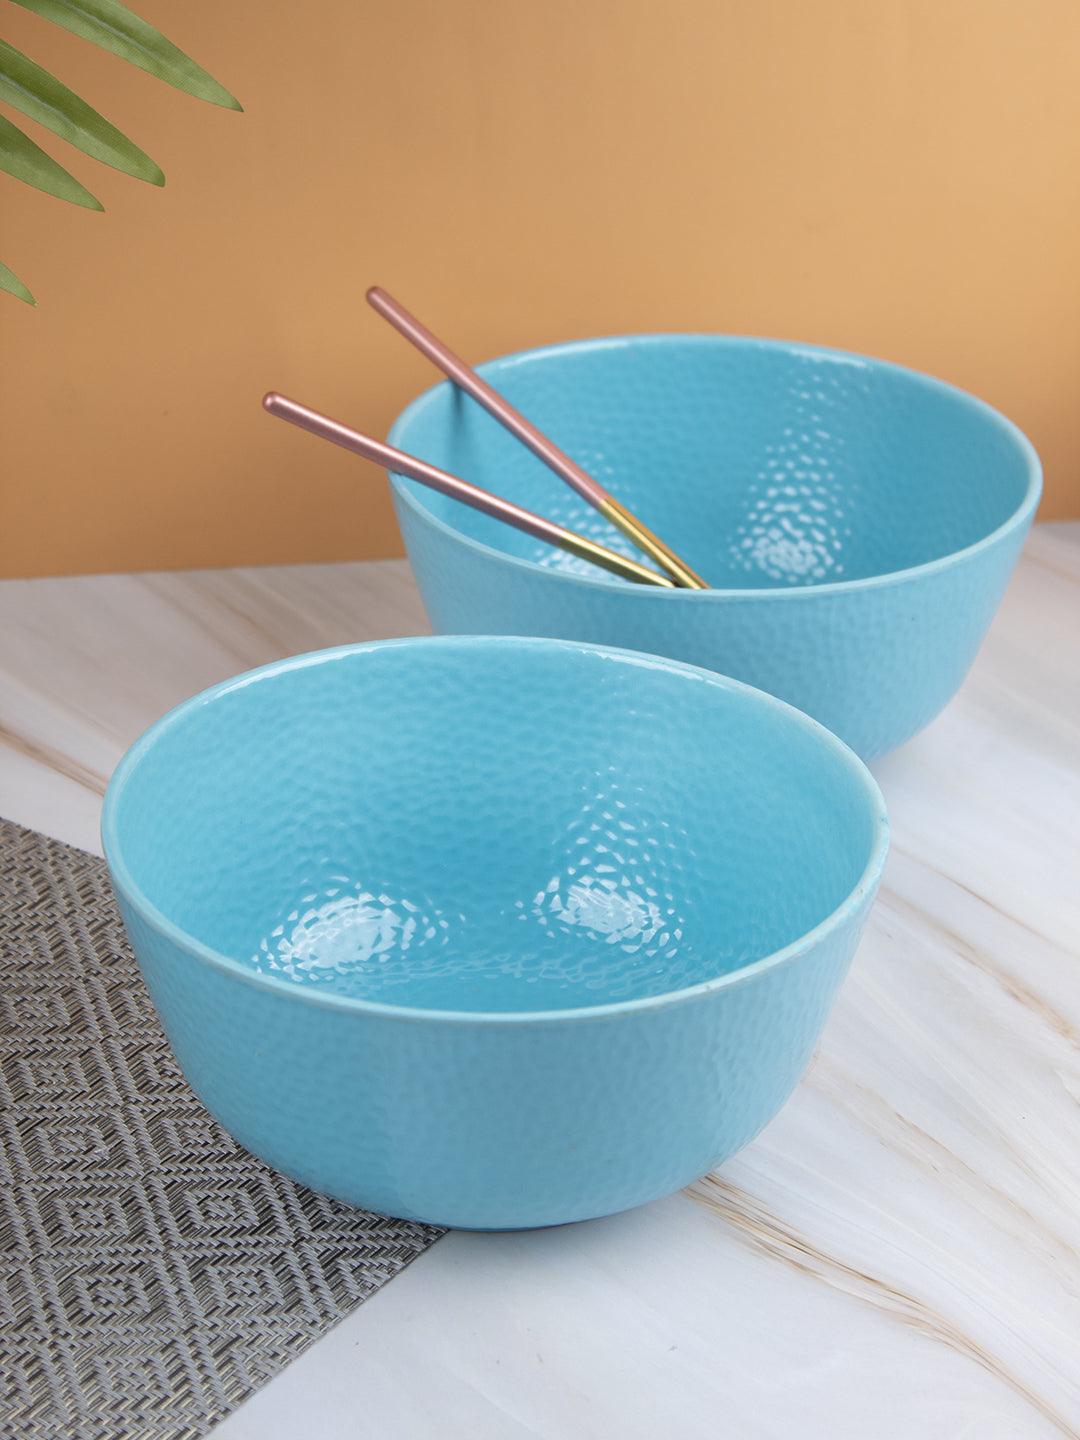 Buy Melamine Turquoise Round Serving Bowl (Set of 2) at the best